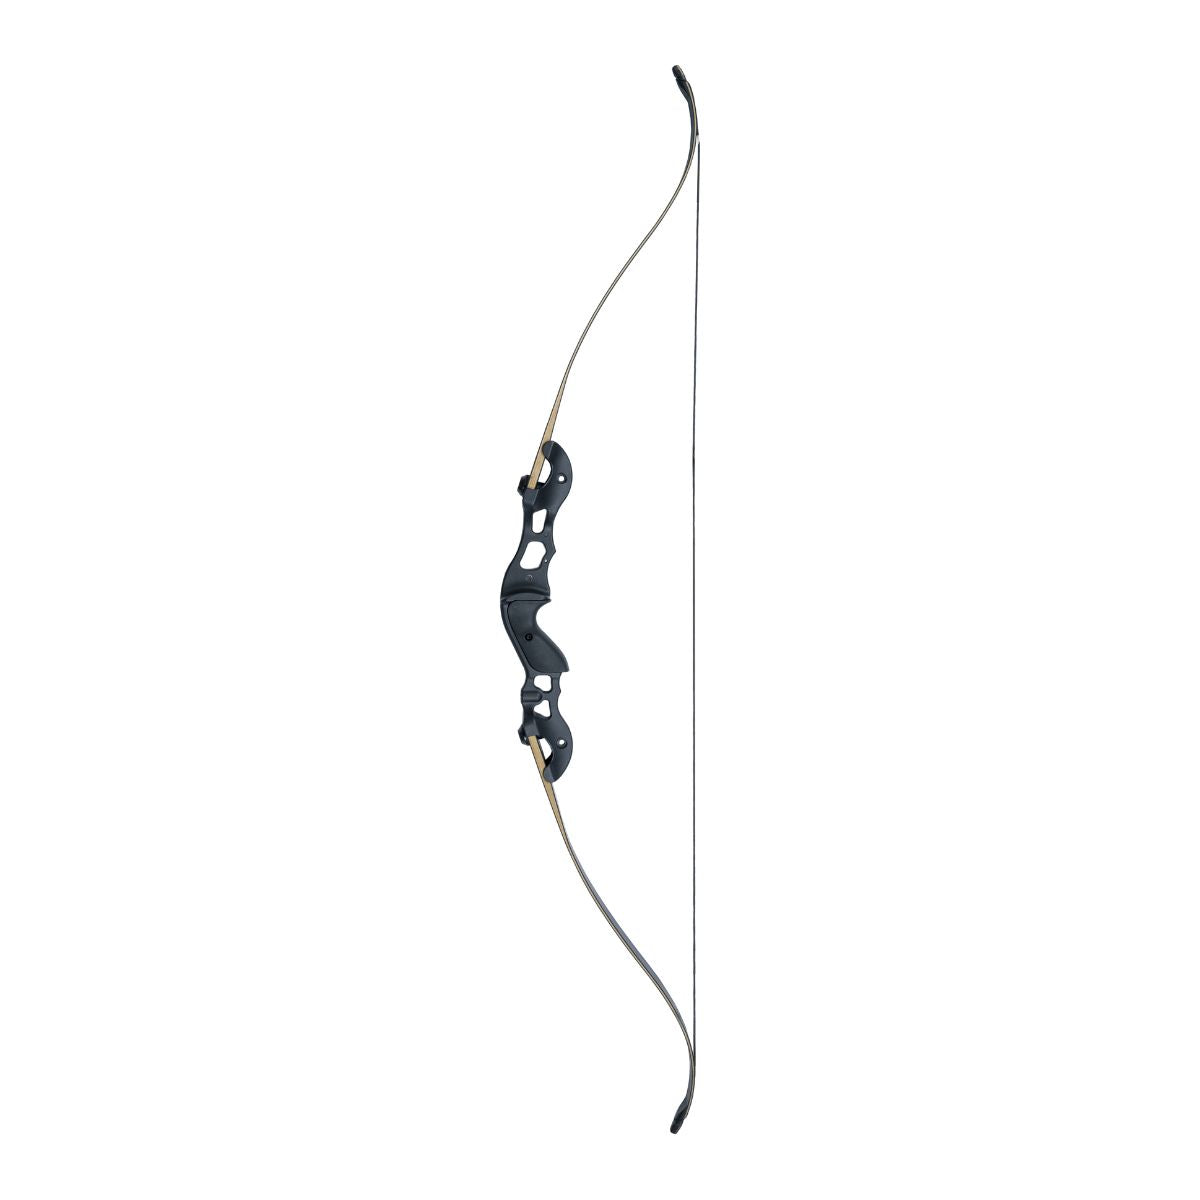 Brute Re-Curve Bow - AB-R185 1